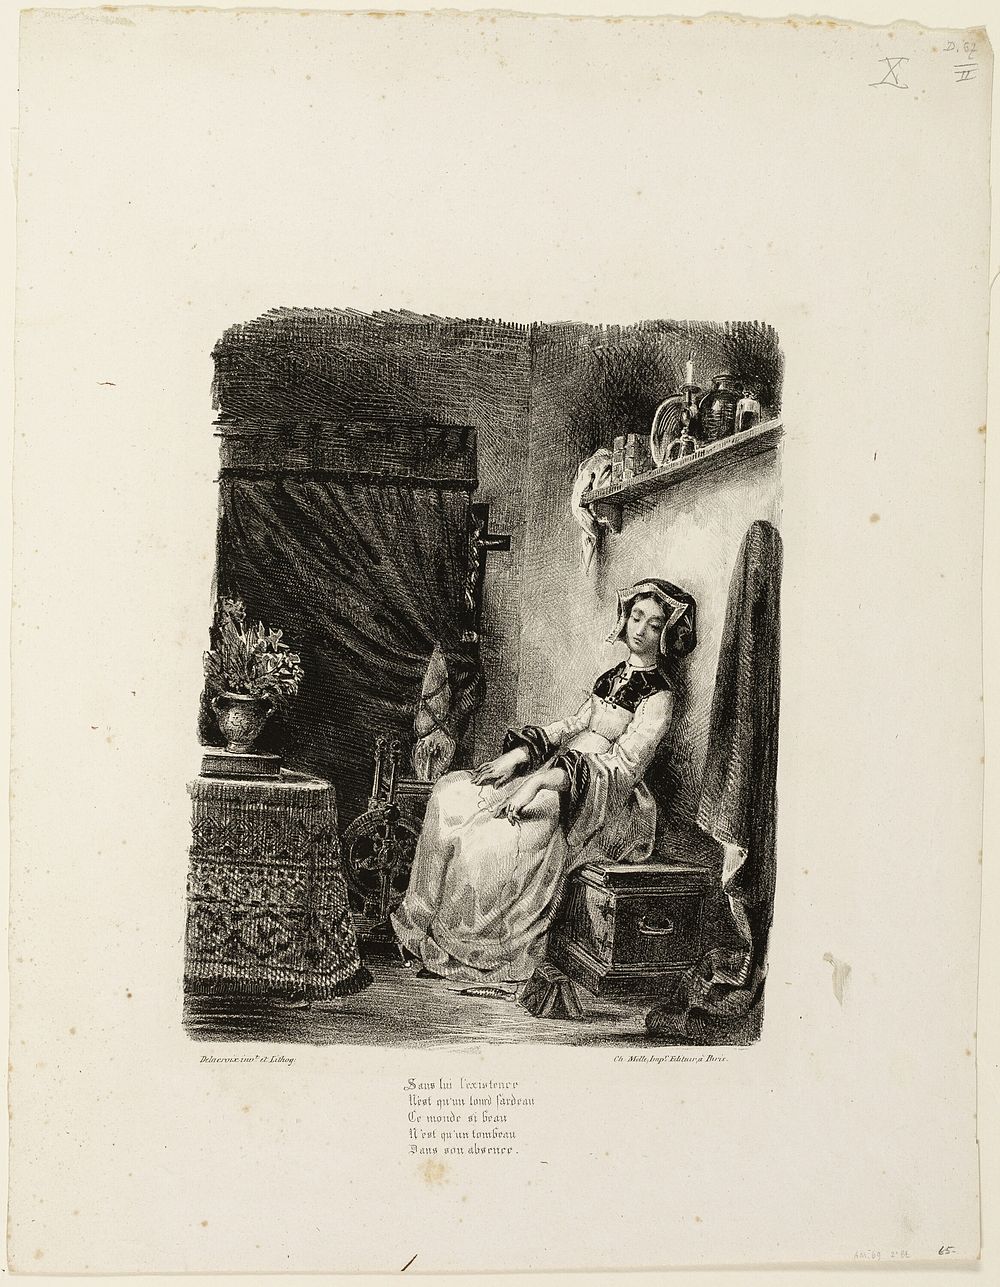 Marguerite at the Spinning Wheel by Eugène Delacroix